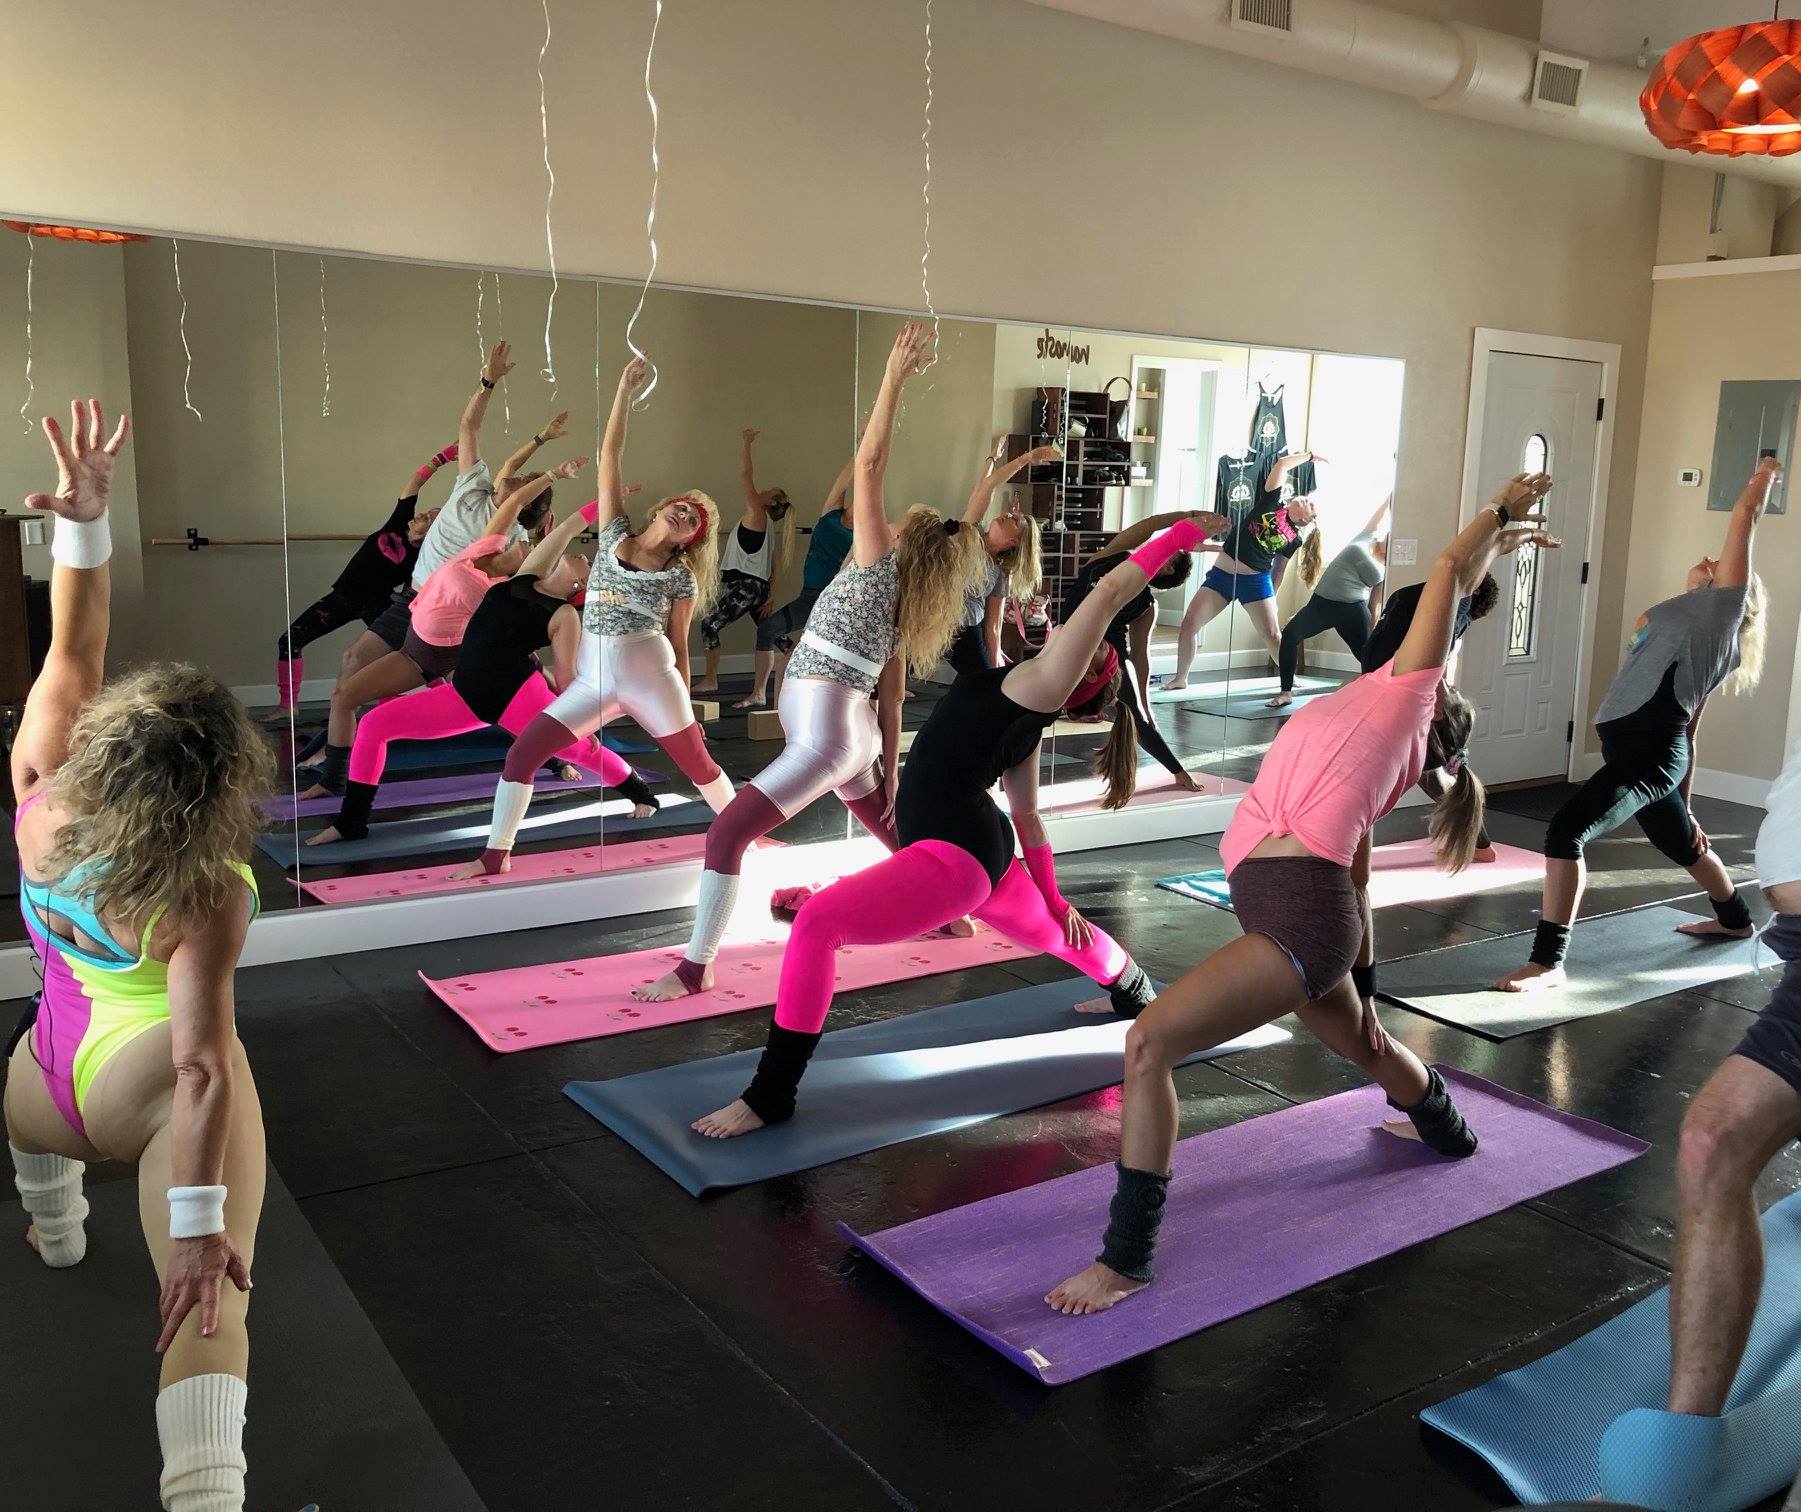 The Titusville Yoga Loft Studio in Downtown Titusville is availble to rent for special events, birthdays, parties, art shows, receptions, graduations, showers, and any private events 13.jpg